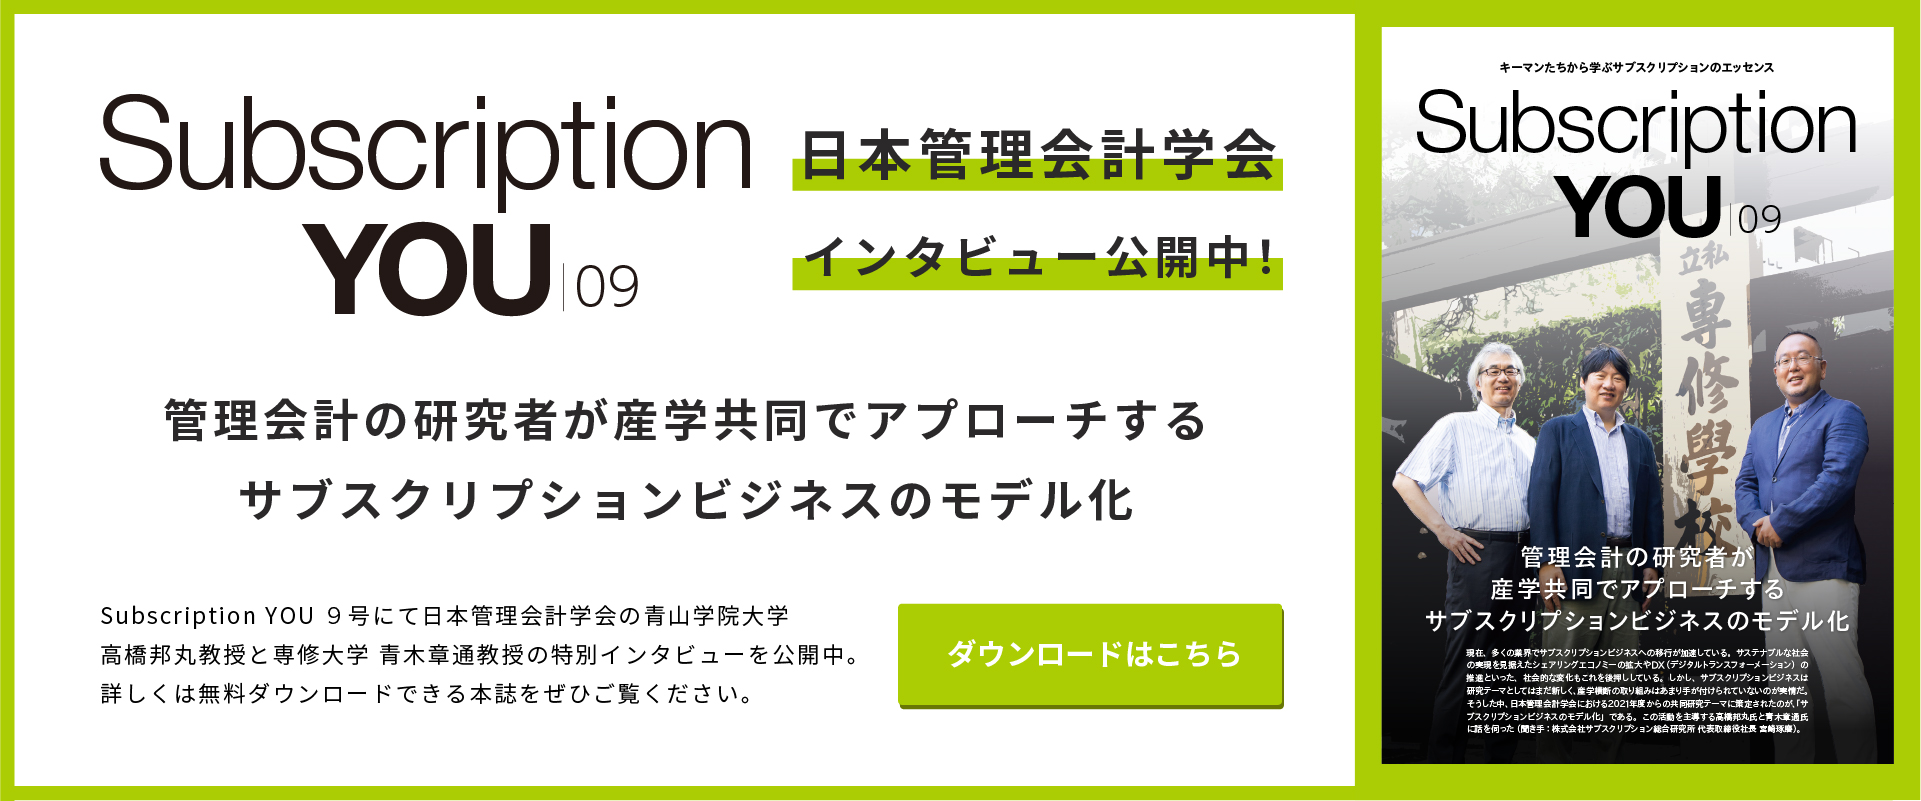 Subscription YOU9号